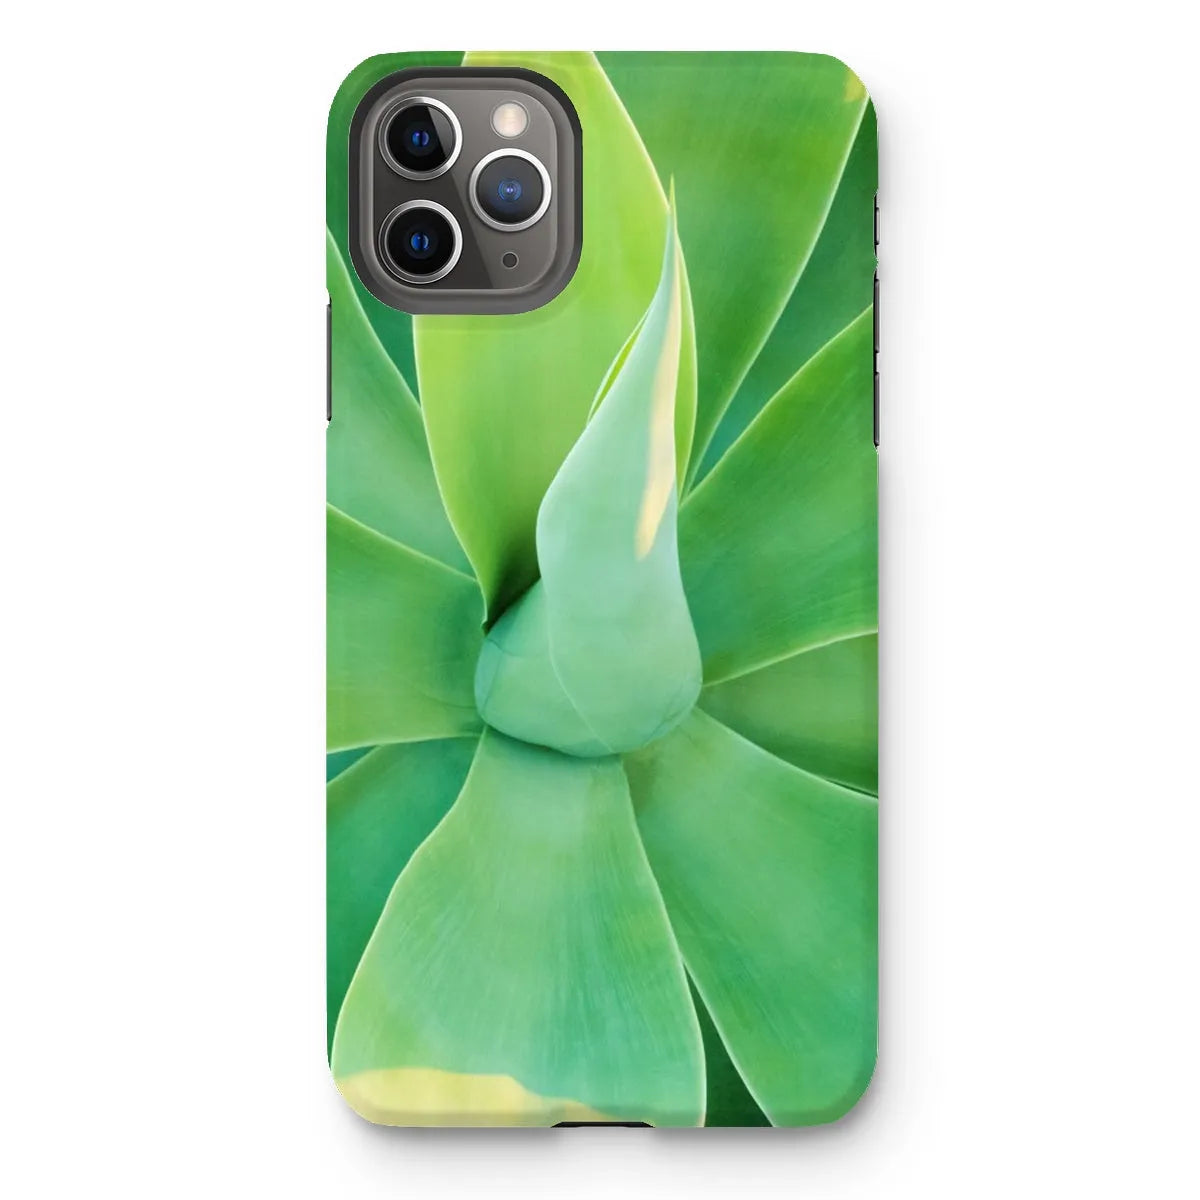 In Bloom Too Tough Phone Case - Iphone 11 Pro Max / Matte - Mobile Phone Cases - Aesthetic Art